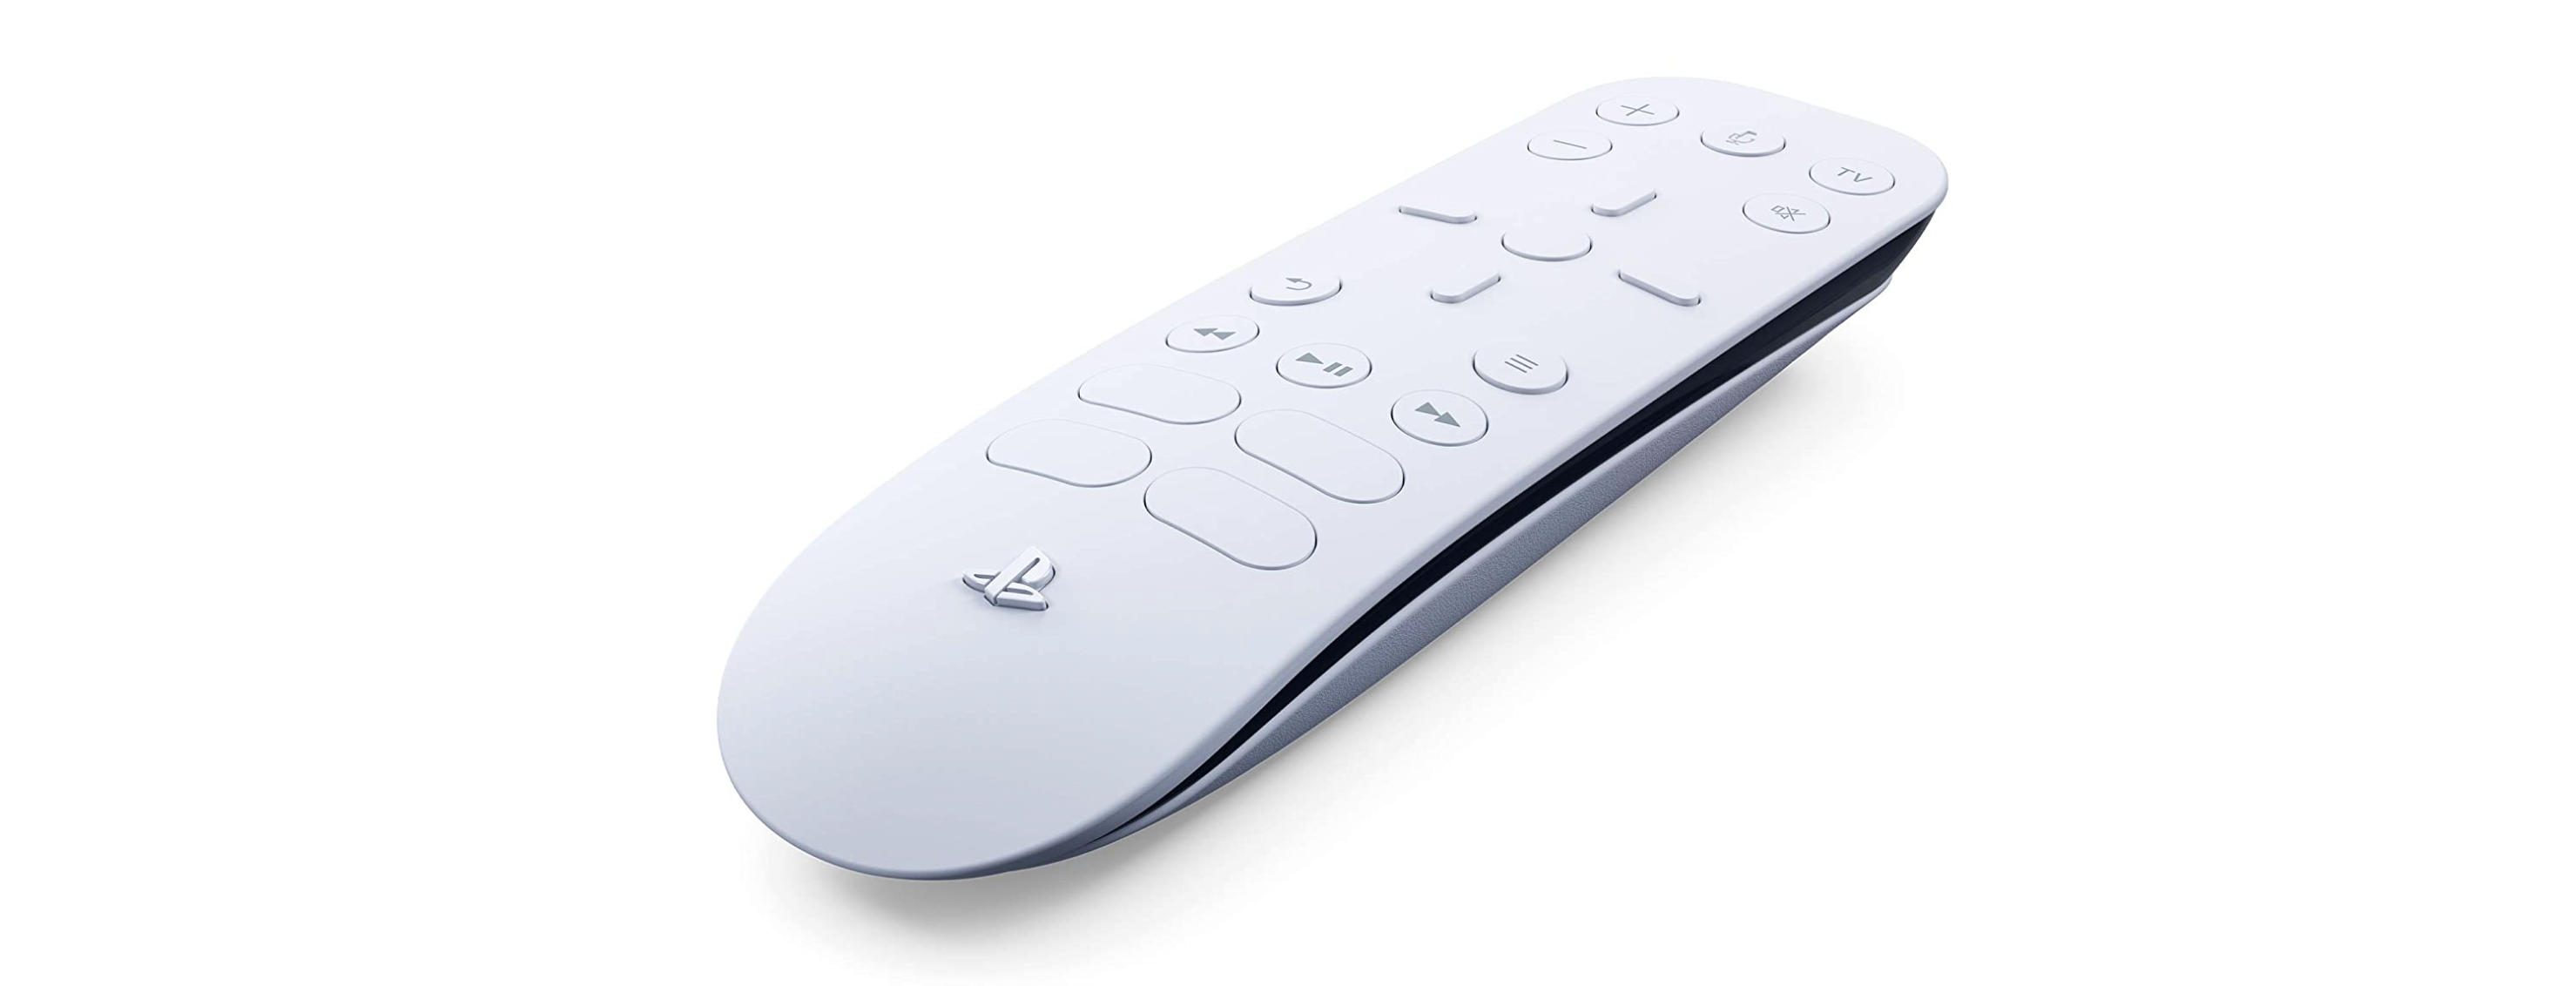 Get Sony's PS5 Media Remote so you never have to leave your sofa again |  GamesRadar+